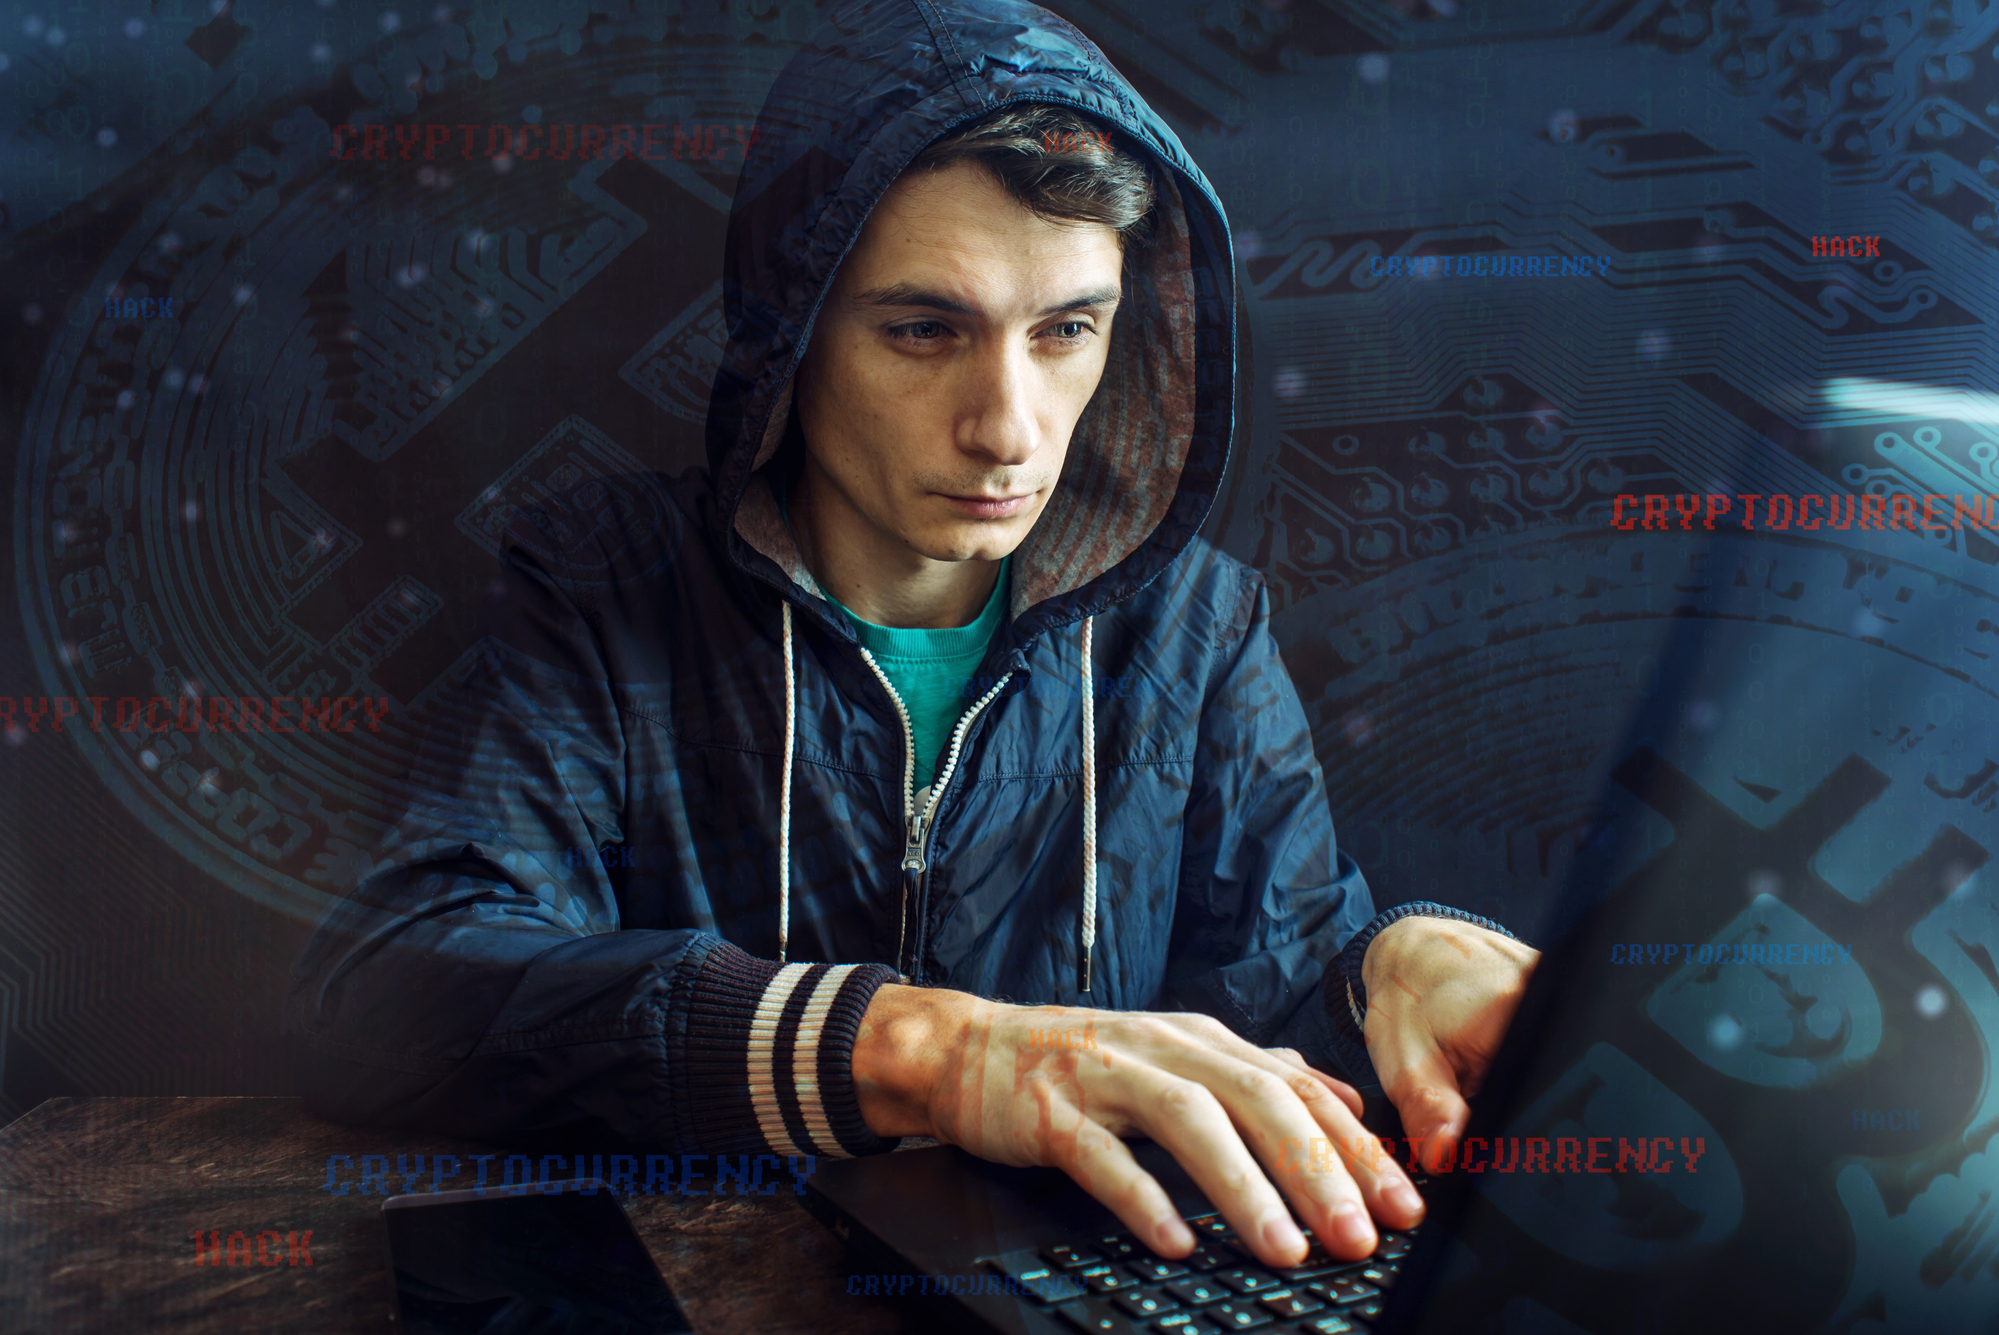 Hacker with a face is trying to steal cryptocurrency using a computer. Fraud at Cryptojacking